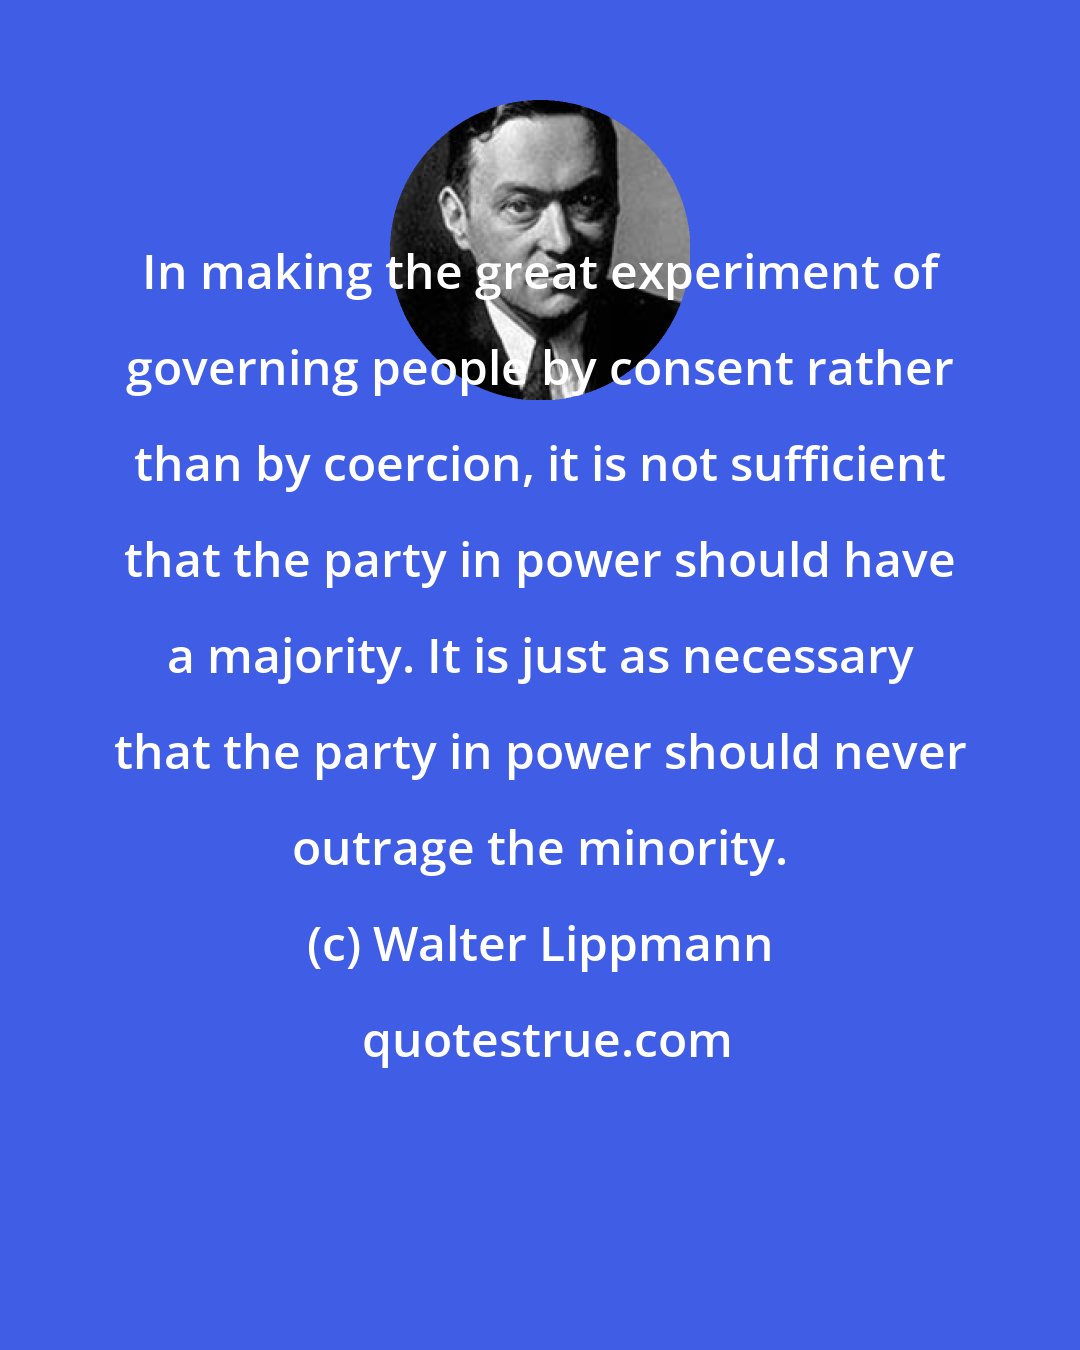 Walter Lippmann: In making the great experiment of governing people by consent rather than by coercion, it is not sufficient that the party in power should have a majority. It is just as necessary that the party in power should never outrage the minority.